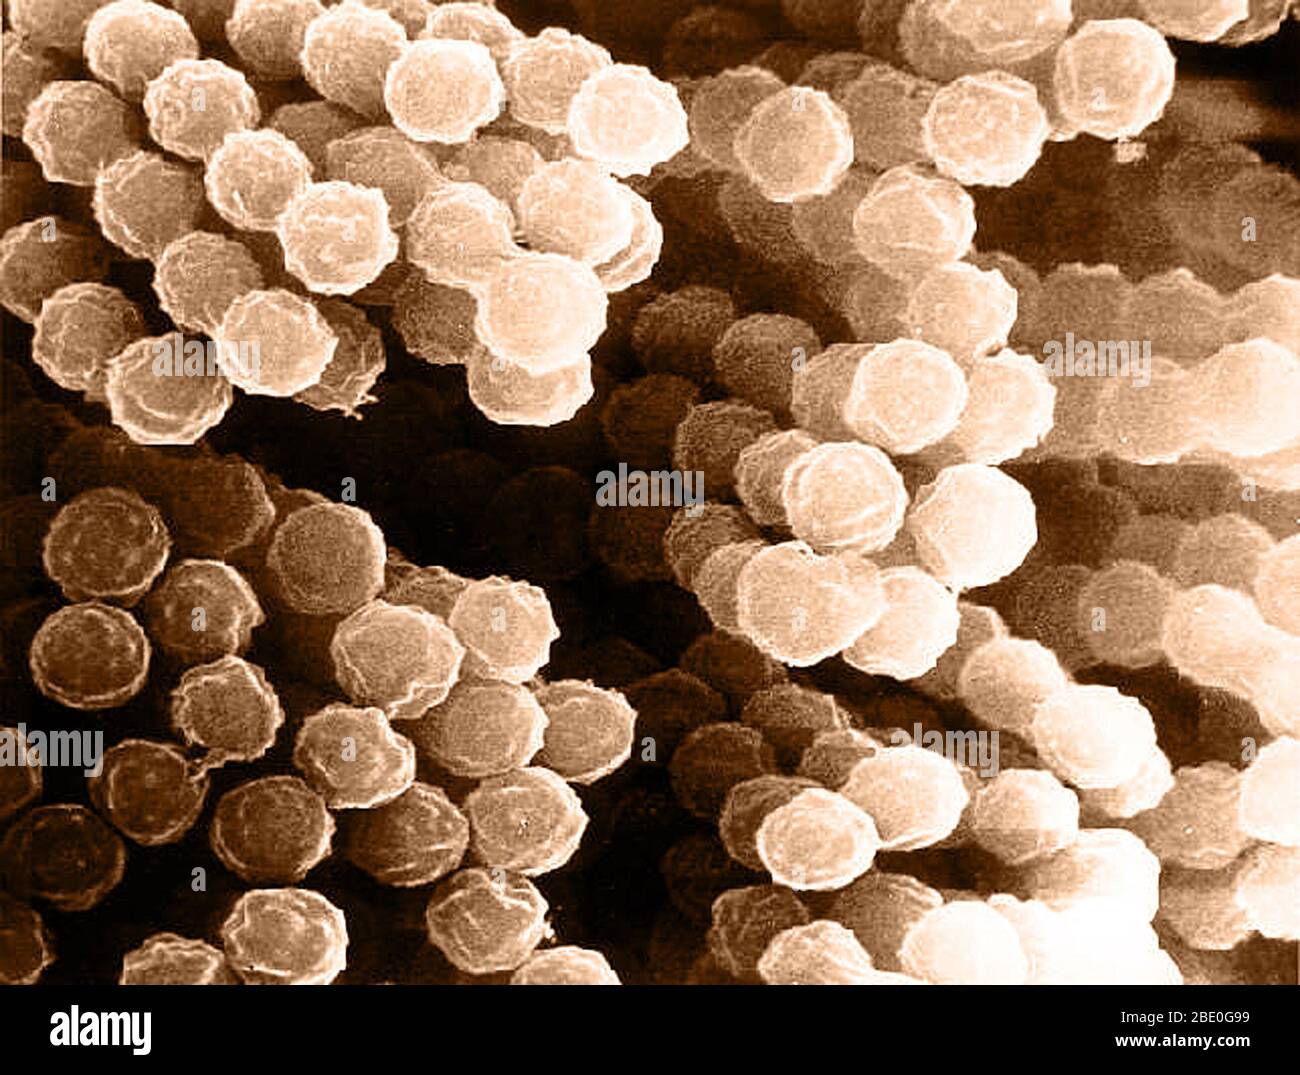 Color enhanced scanning electron micrograph (SEM) of Aspergillus species. Over 185 species of fungi are included in the genus Aspergillus, the most common being fumigatus. Aspergillus is a group of molds known to produce aflatoxins (a known carcinogen) that can infect feed crops and food. The fungi also can cause allergic illnesses, infections, and diseases known as Aspergillosis. Stock Photo